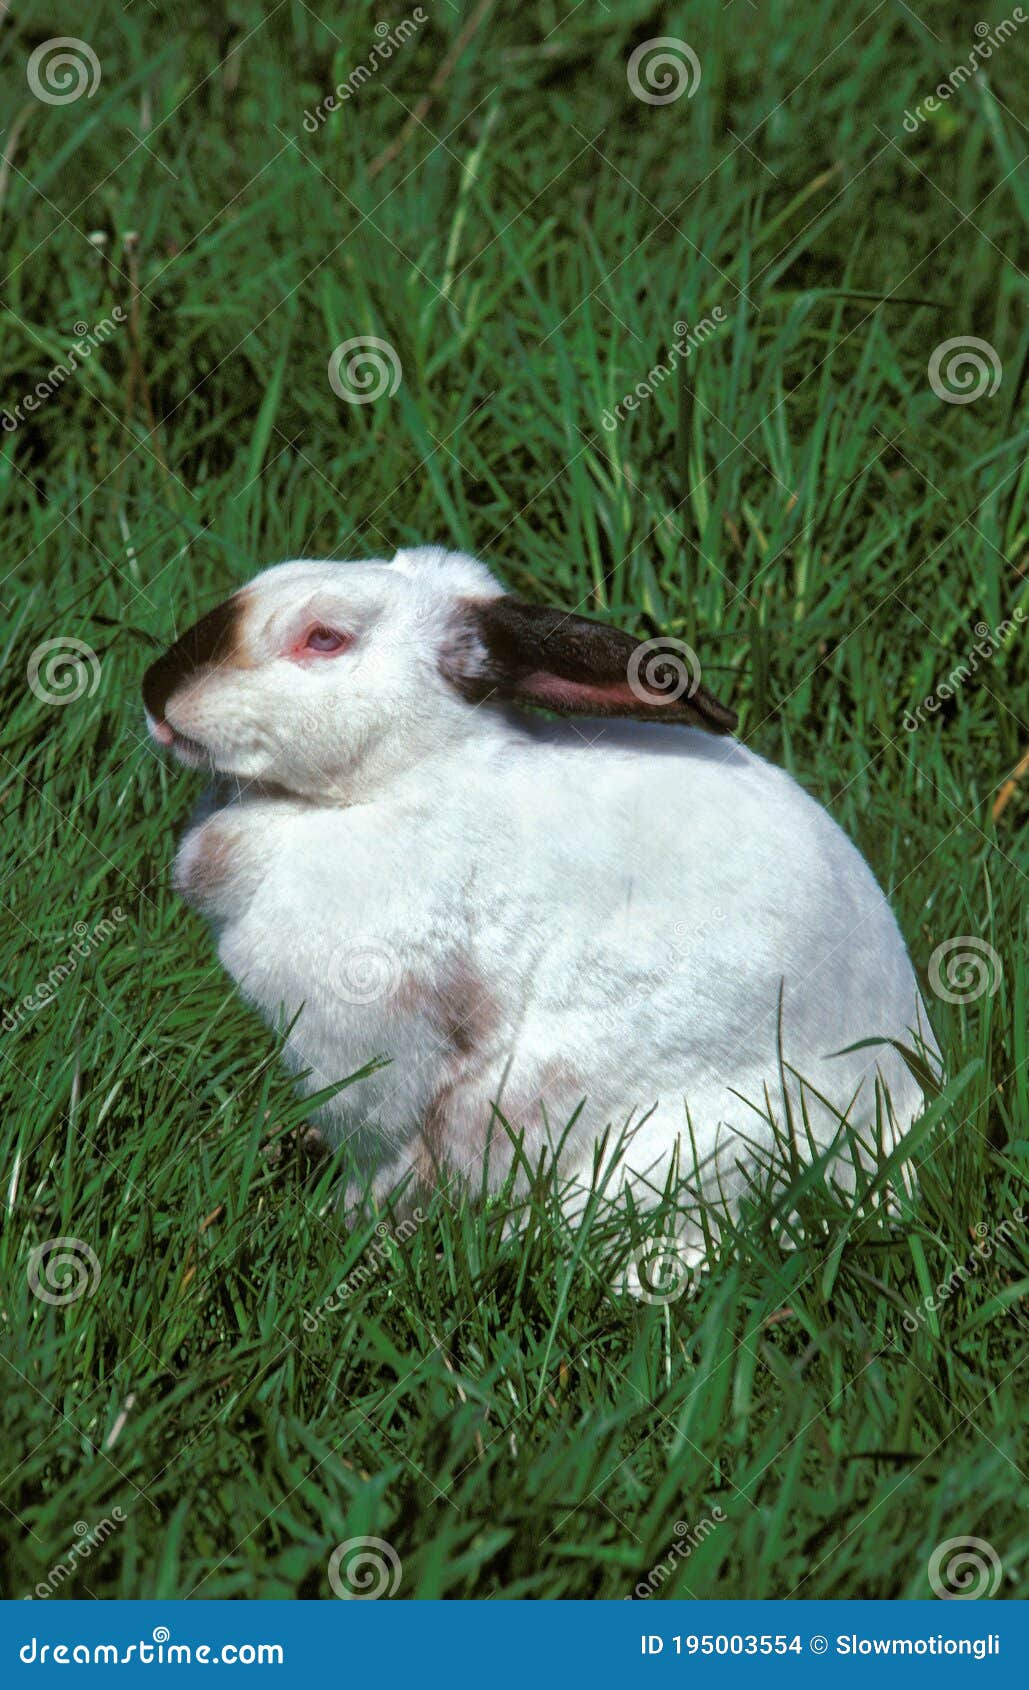 Californian Rabbit Breed From United States Stock Photo Image Of Animal Outdoor 195003554